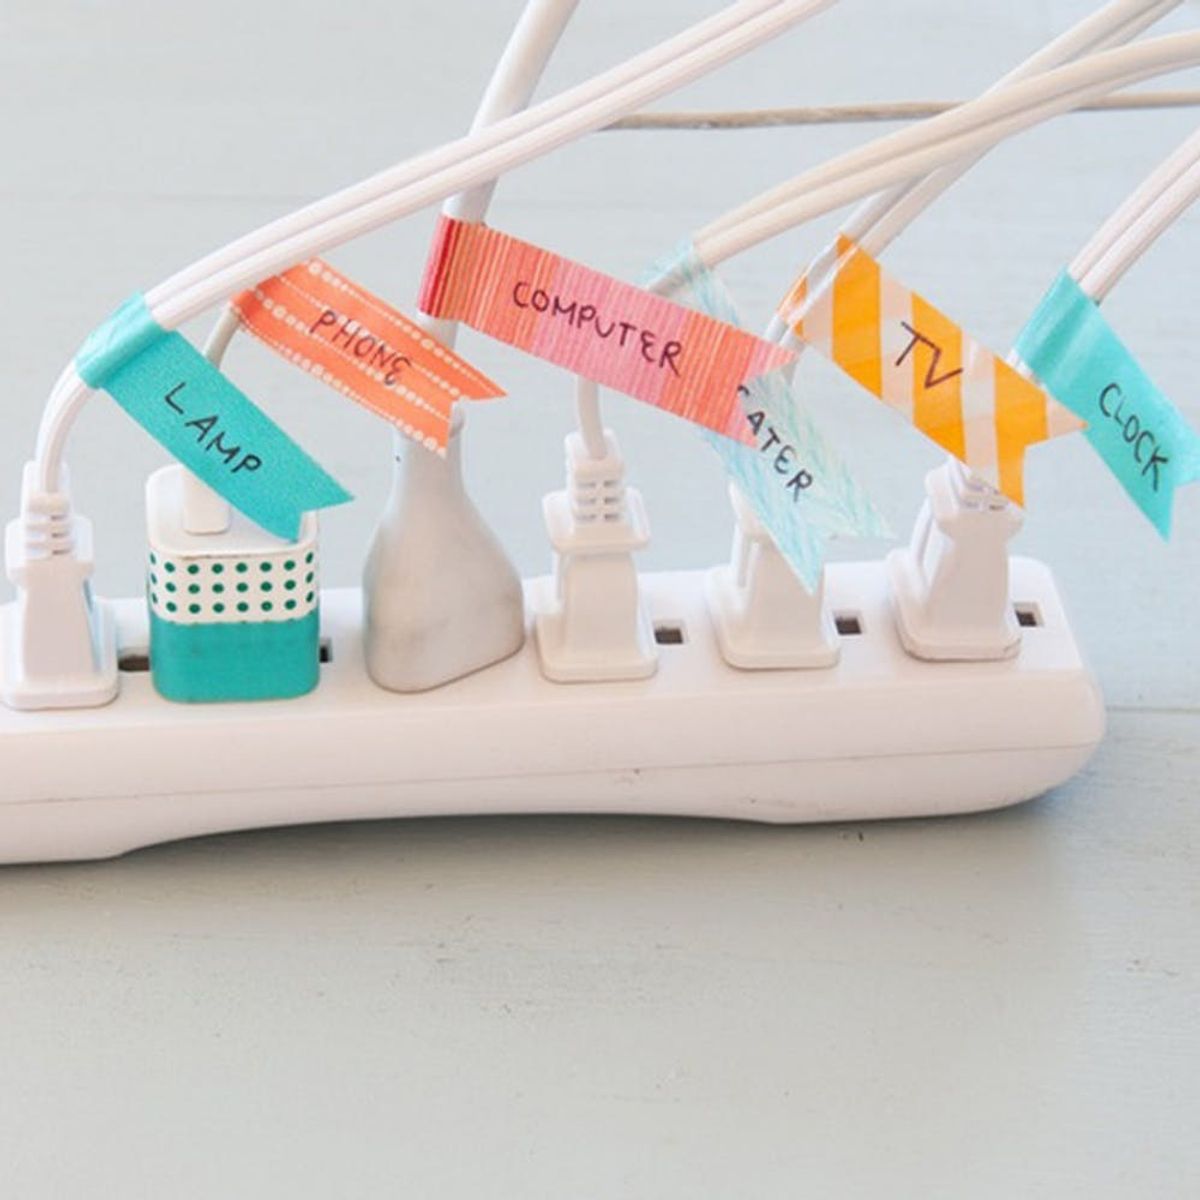 Make These Washi Tape Cord Labels to Organize ALL Your Tech